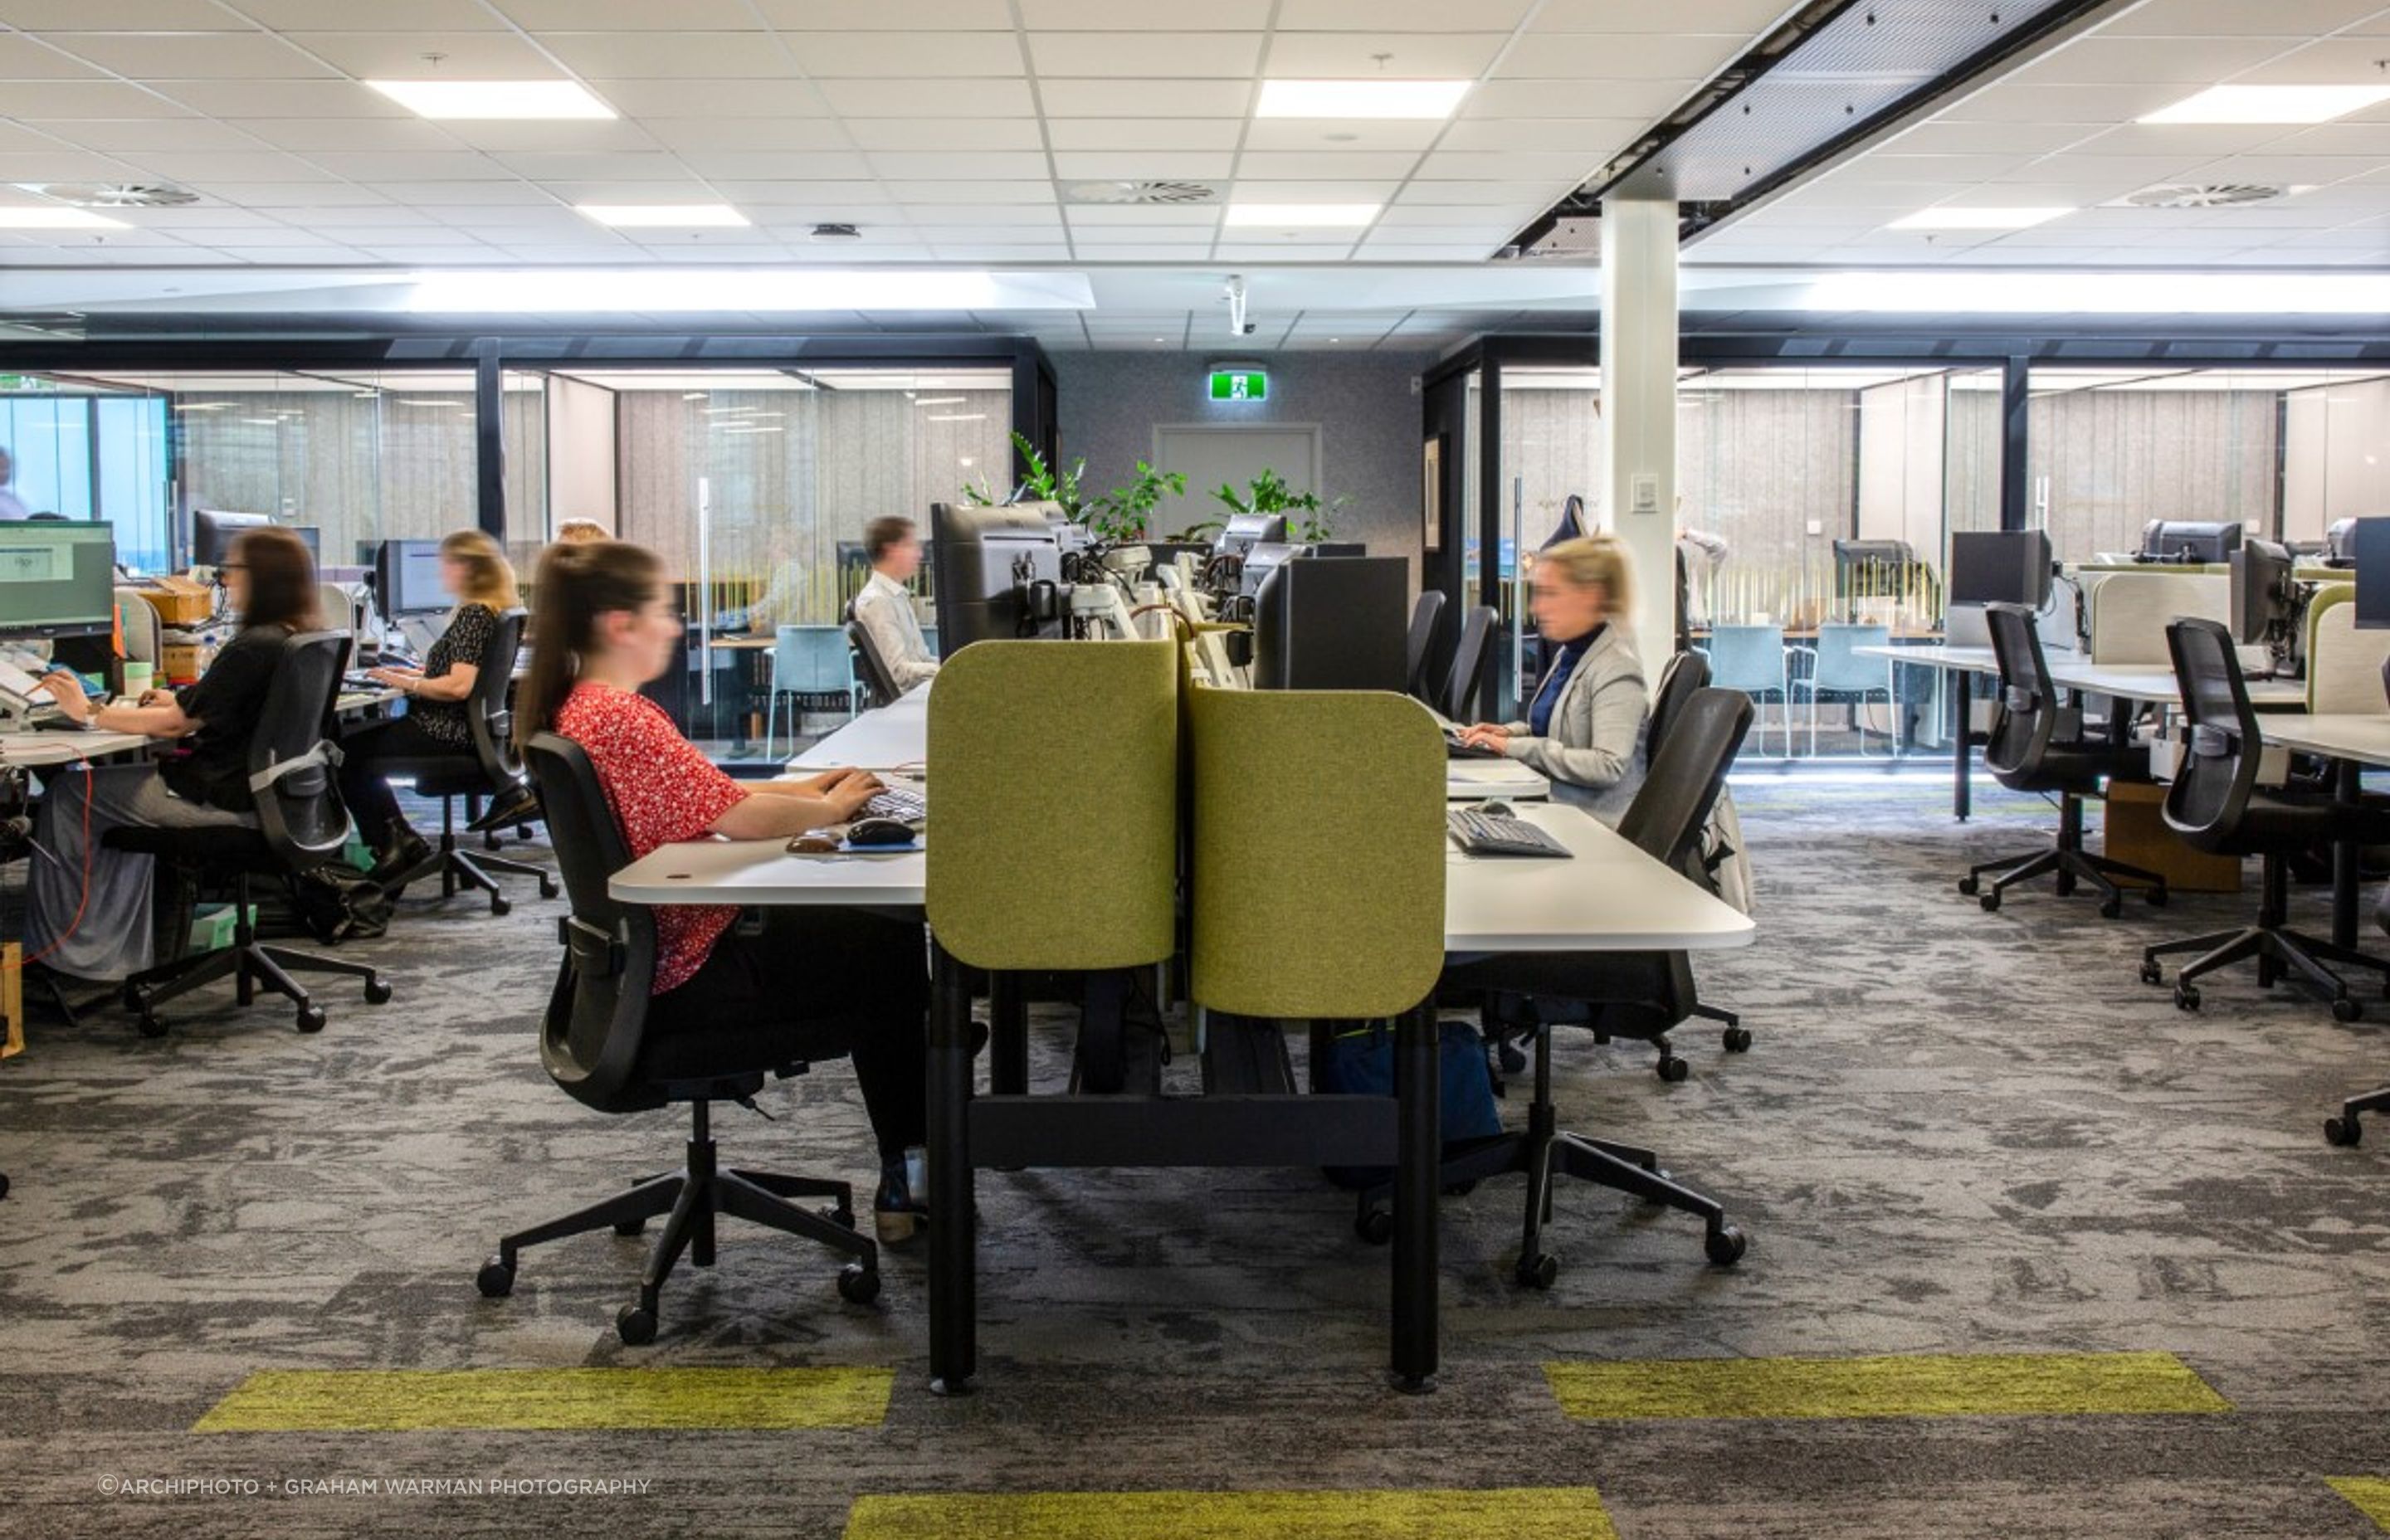 Open office - central desking space